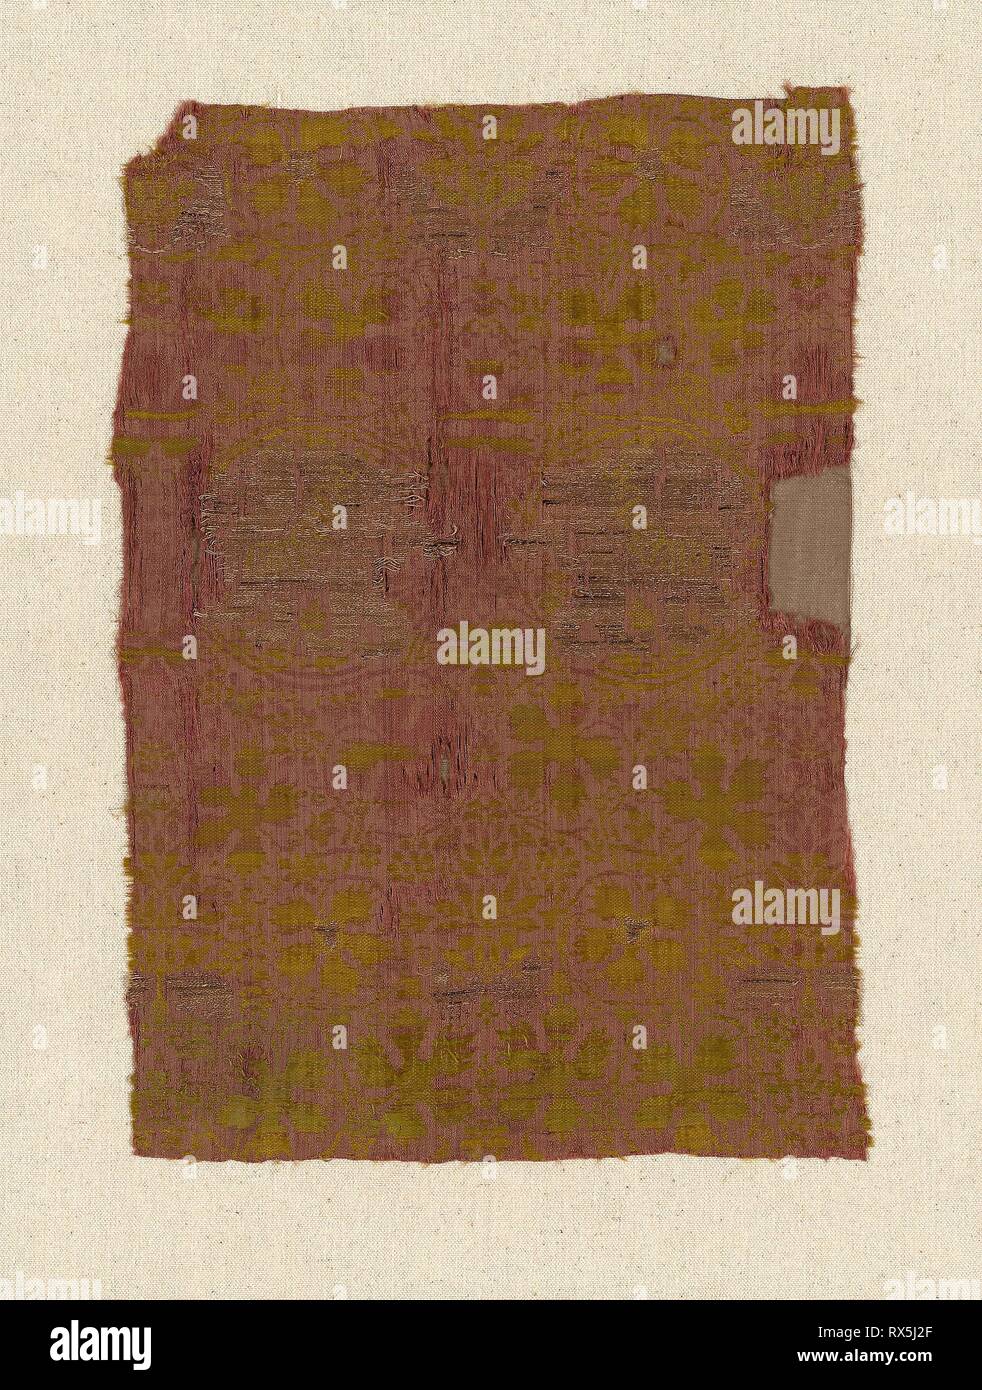 Fragment. Italy. Date: 1325-1375. Dimensions: 33 x 23.1 cm (13 x 9 18 in.). Silk and gilt-animal-substrate-wrapped linen, plain weave with supplementary patterning and brocading wefts bound by secondary binding warps in plain interlacings. Origin: Italy. Museum: The Chicago Art Institute. Stock Photo